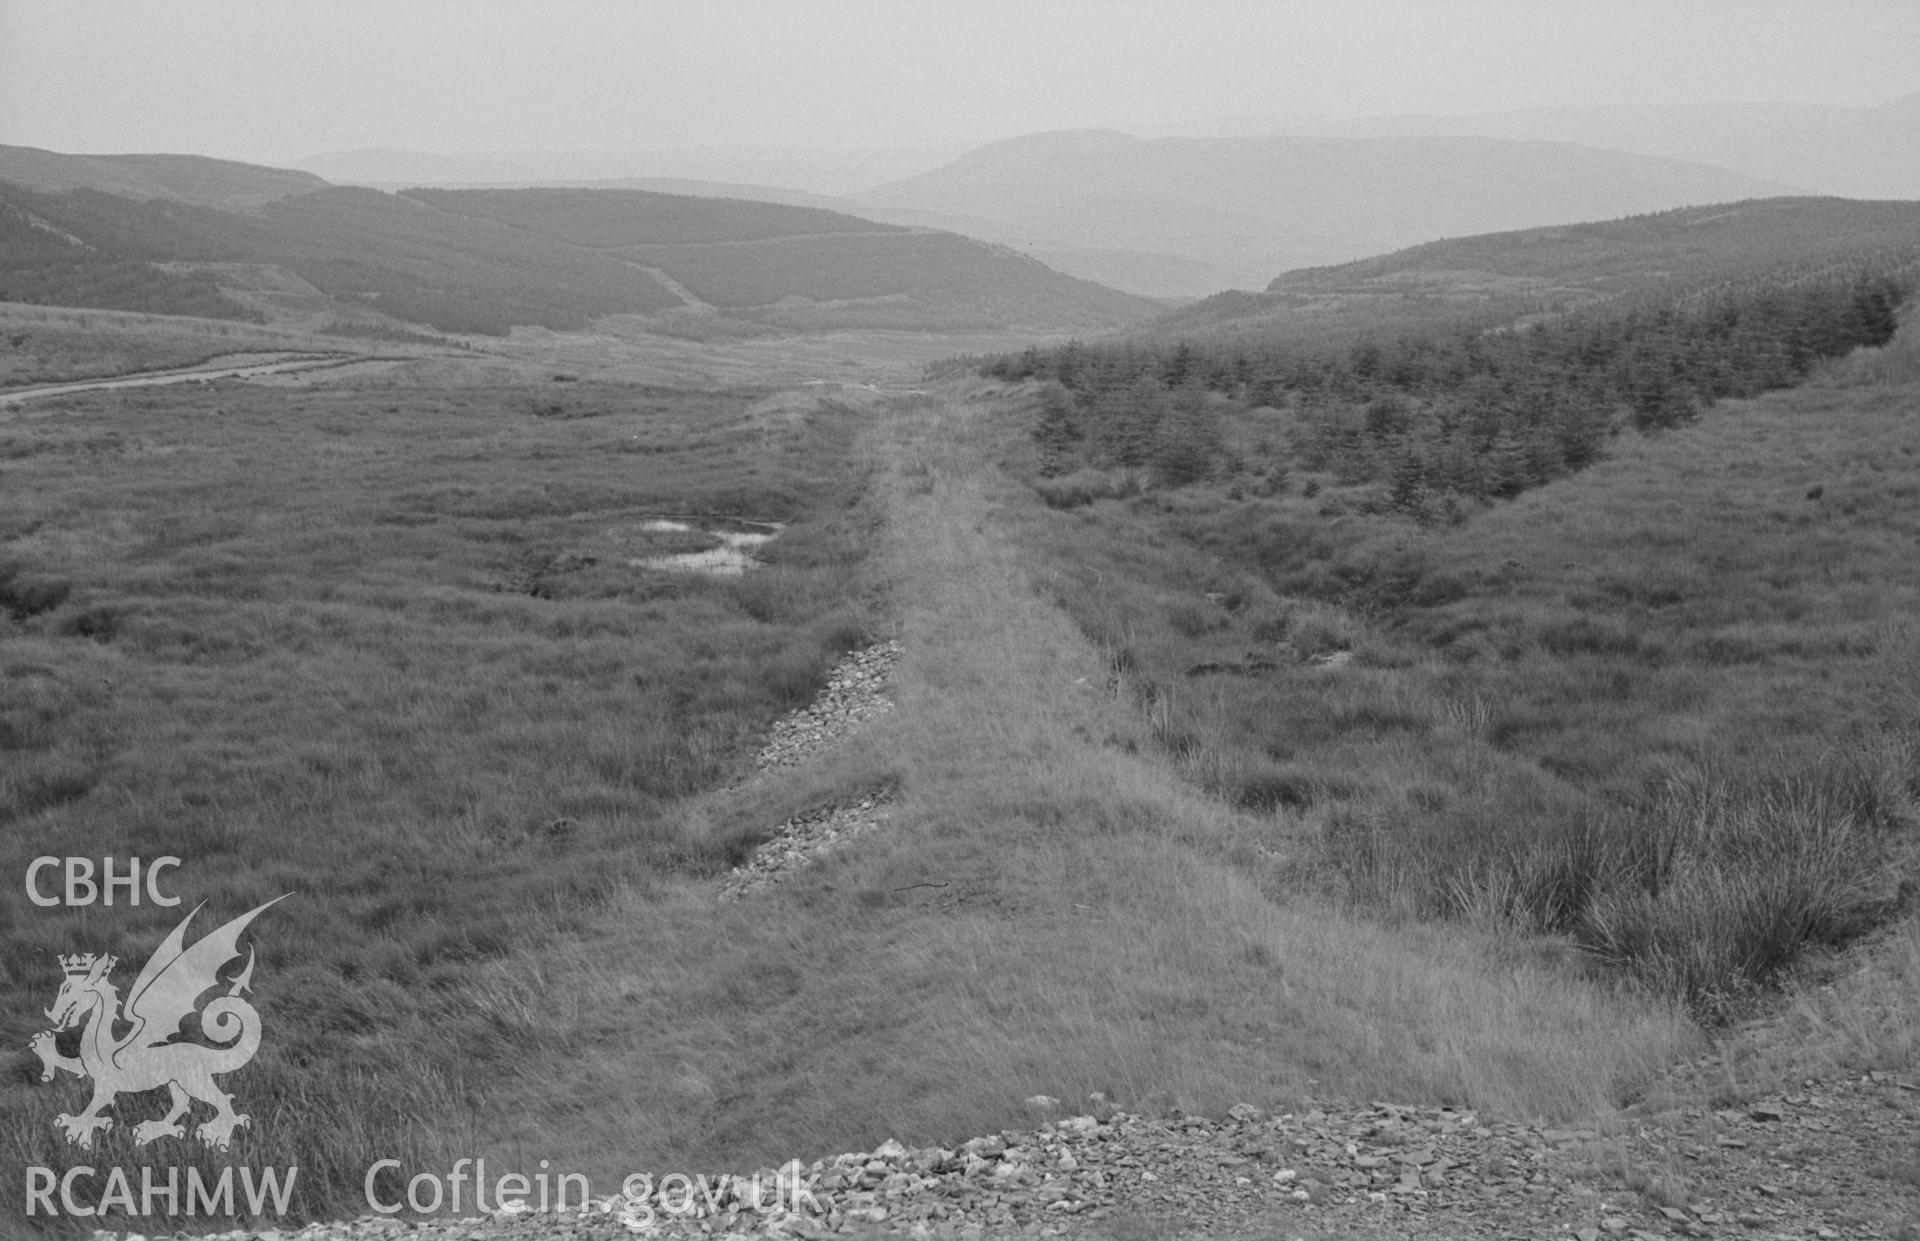 Digital copy of a black and white negative showing view looking down the line of the pumping road from the bottom of Esgair Hir mine. Photographed by Arthur O. Chater on 22nd August 1967, looking east from Grid Reference SN 735 913.